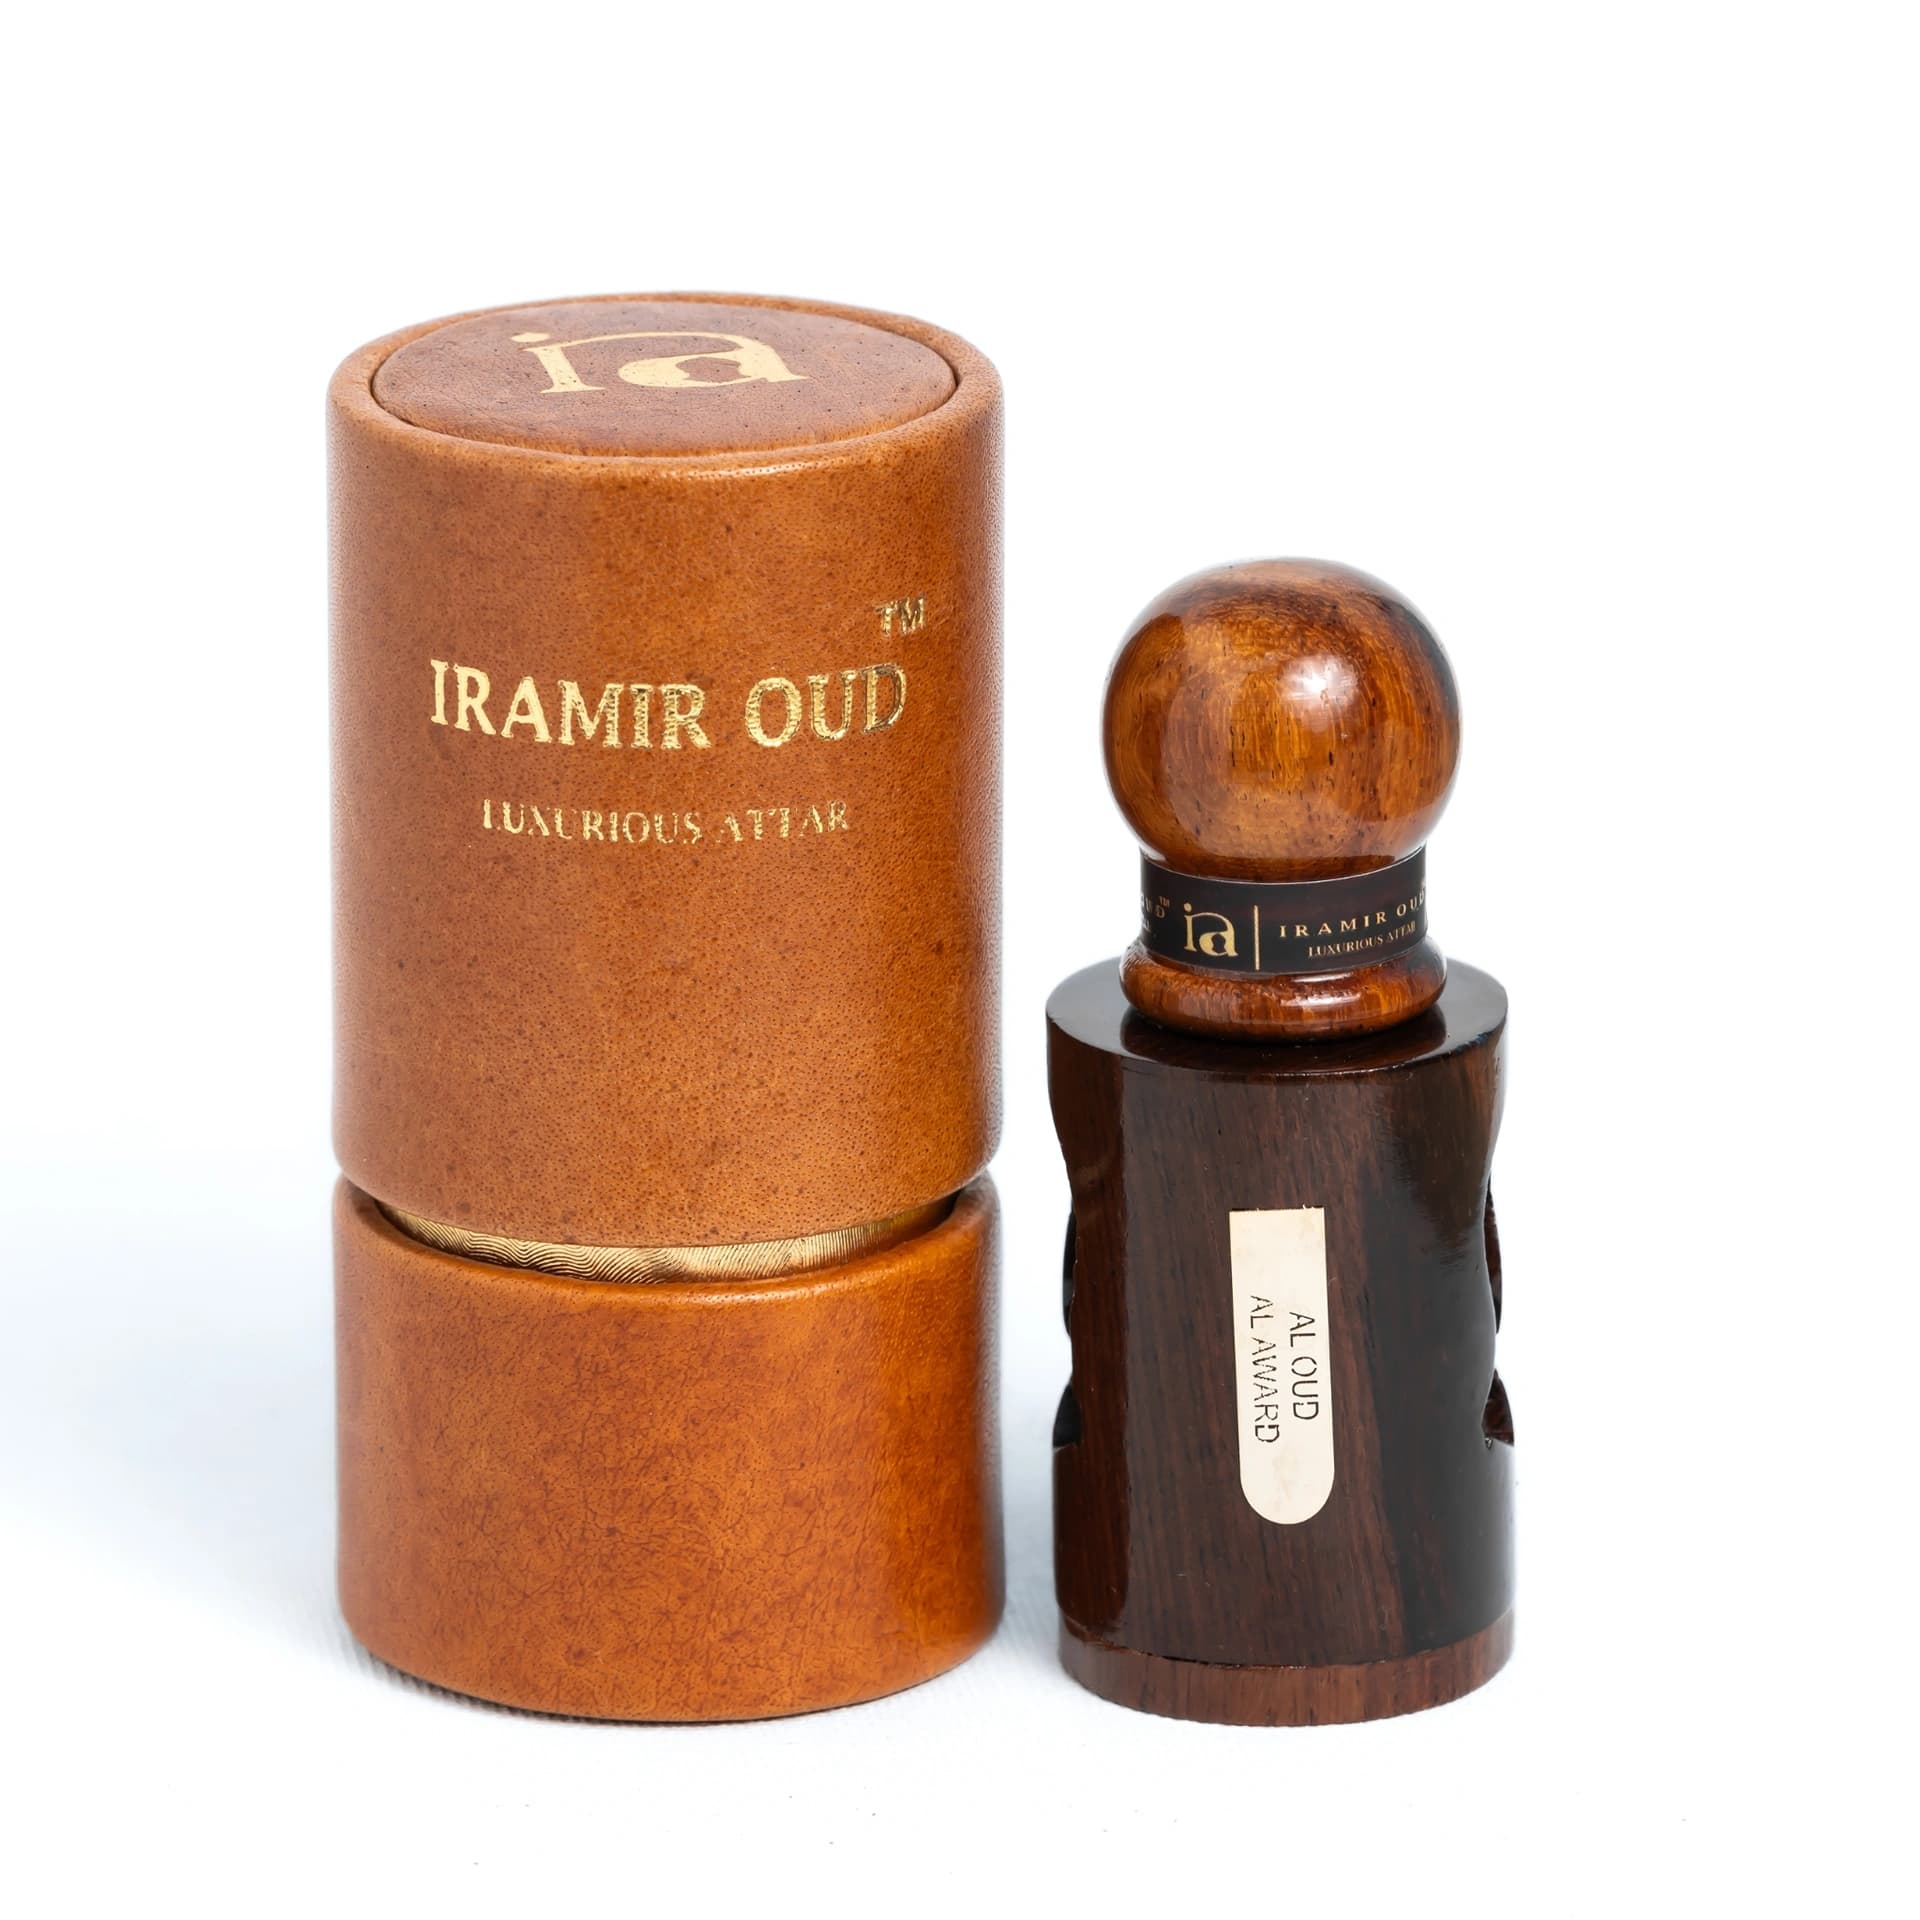 IRAMIR OUD Attar Al Oud Al Ward Fragrance Long Lasting Luxury Perfume Scent For All Occasions, Travel Size For Women And Men Skin Friendly, 6Ml